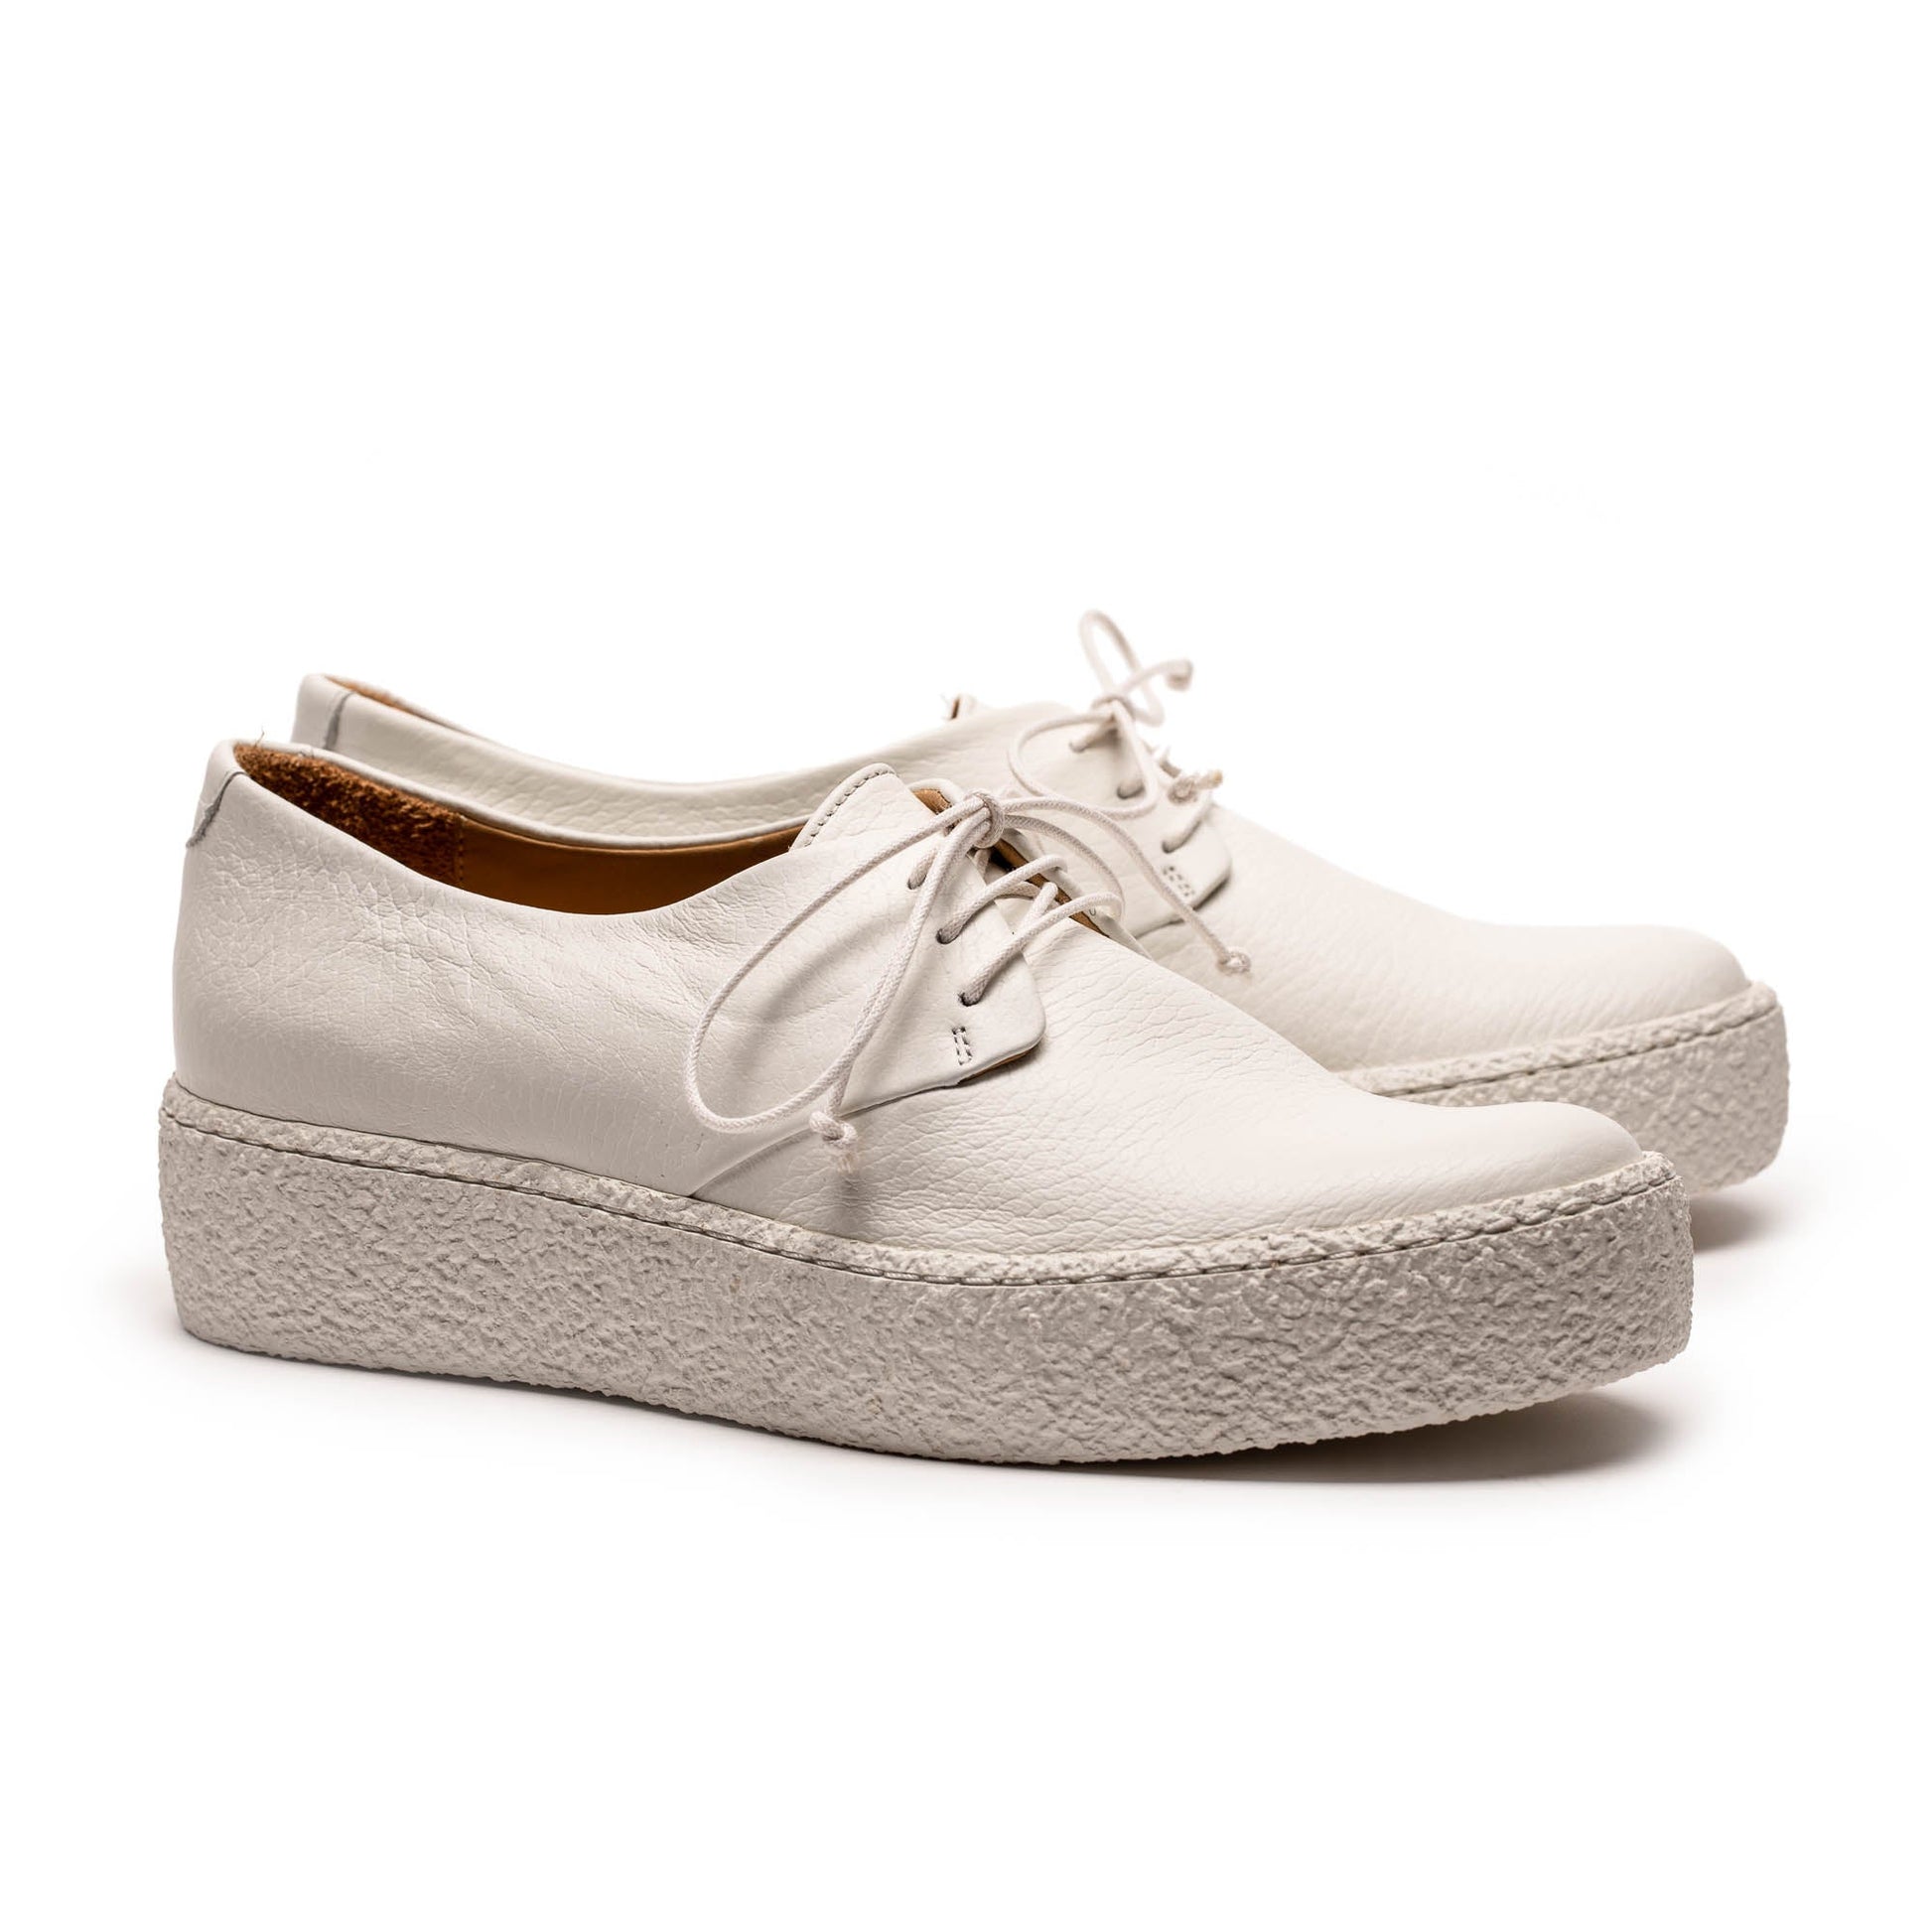 white leather platform sneaker designed by tracey neuls